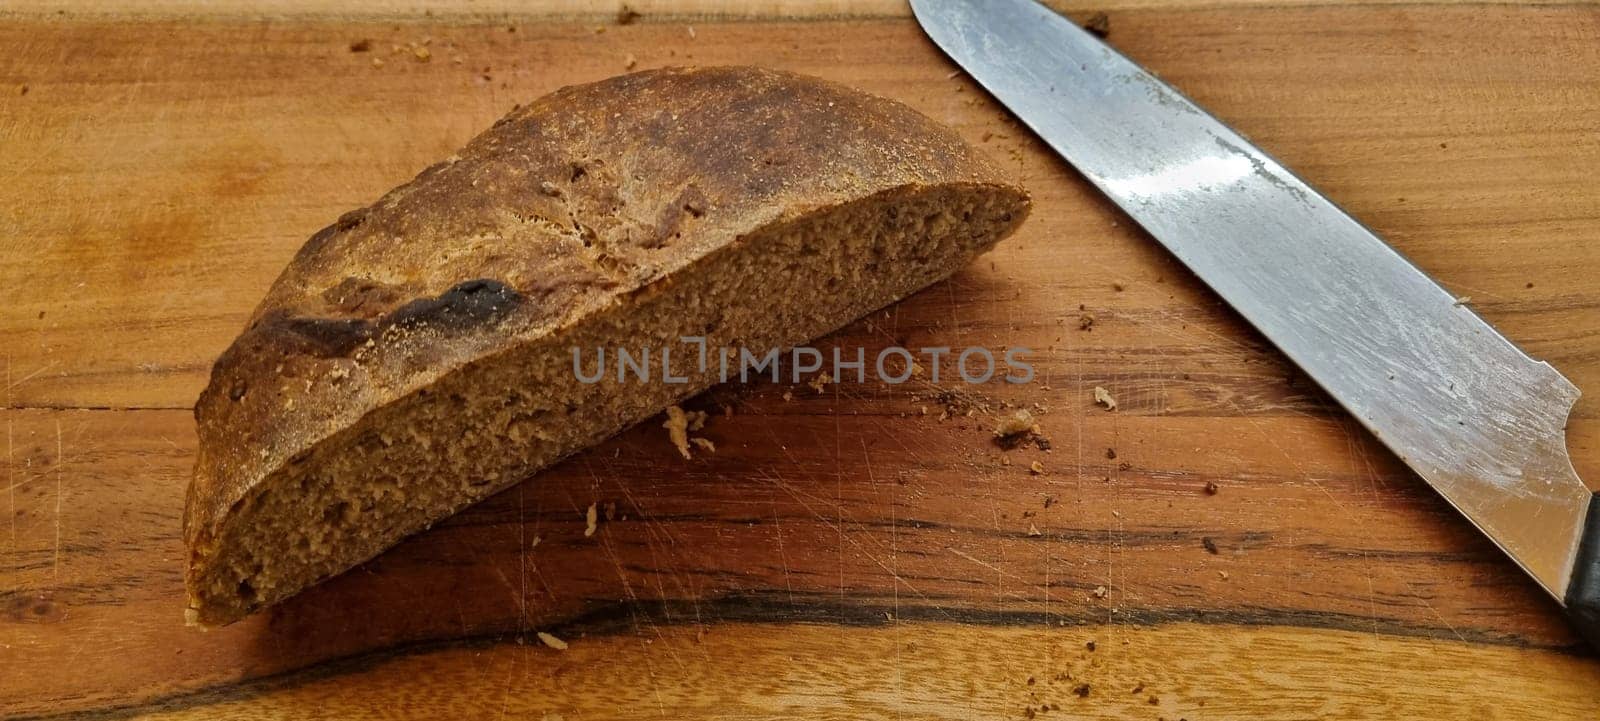 Close-up of a rustic artisan bread loaf sliced on a wooden cutting board next to a knife